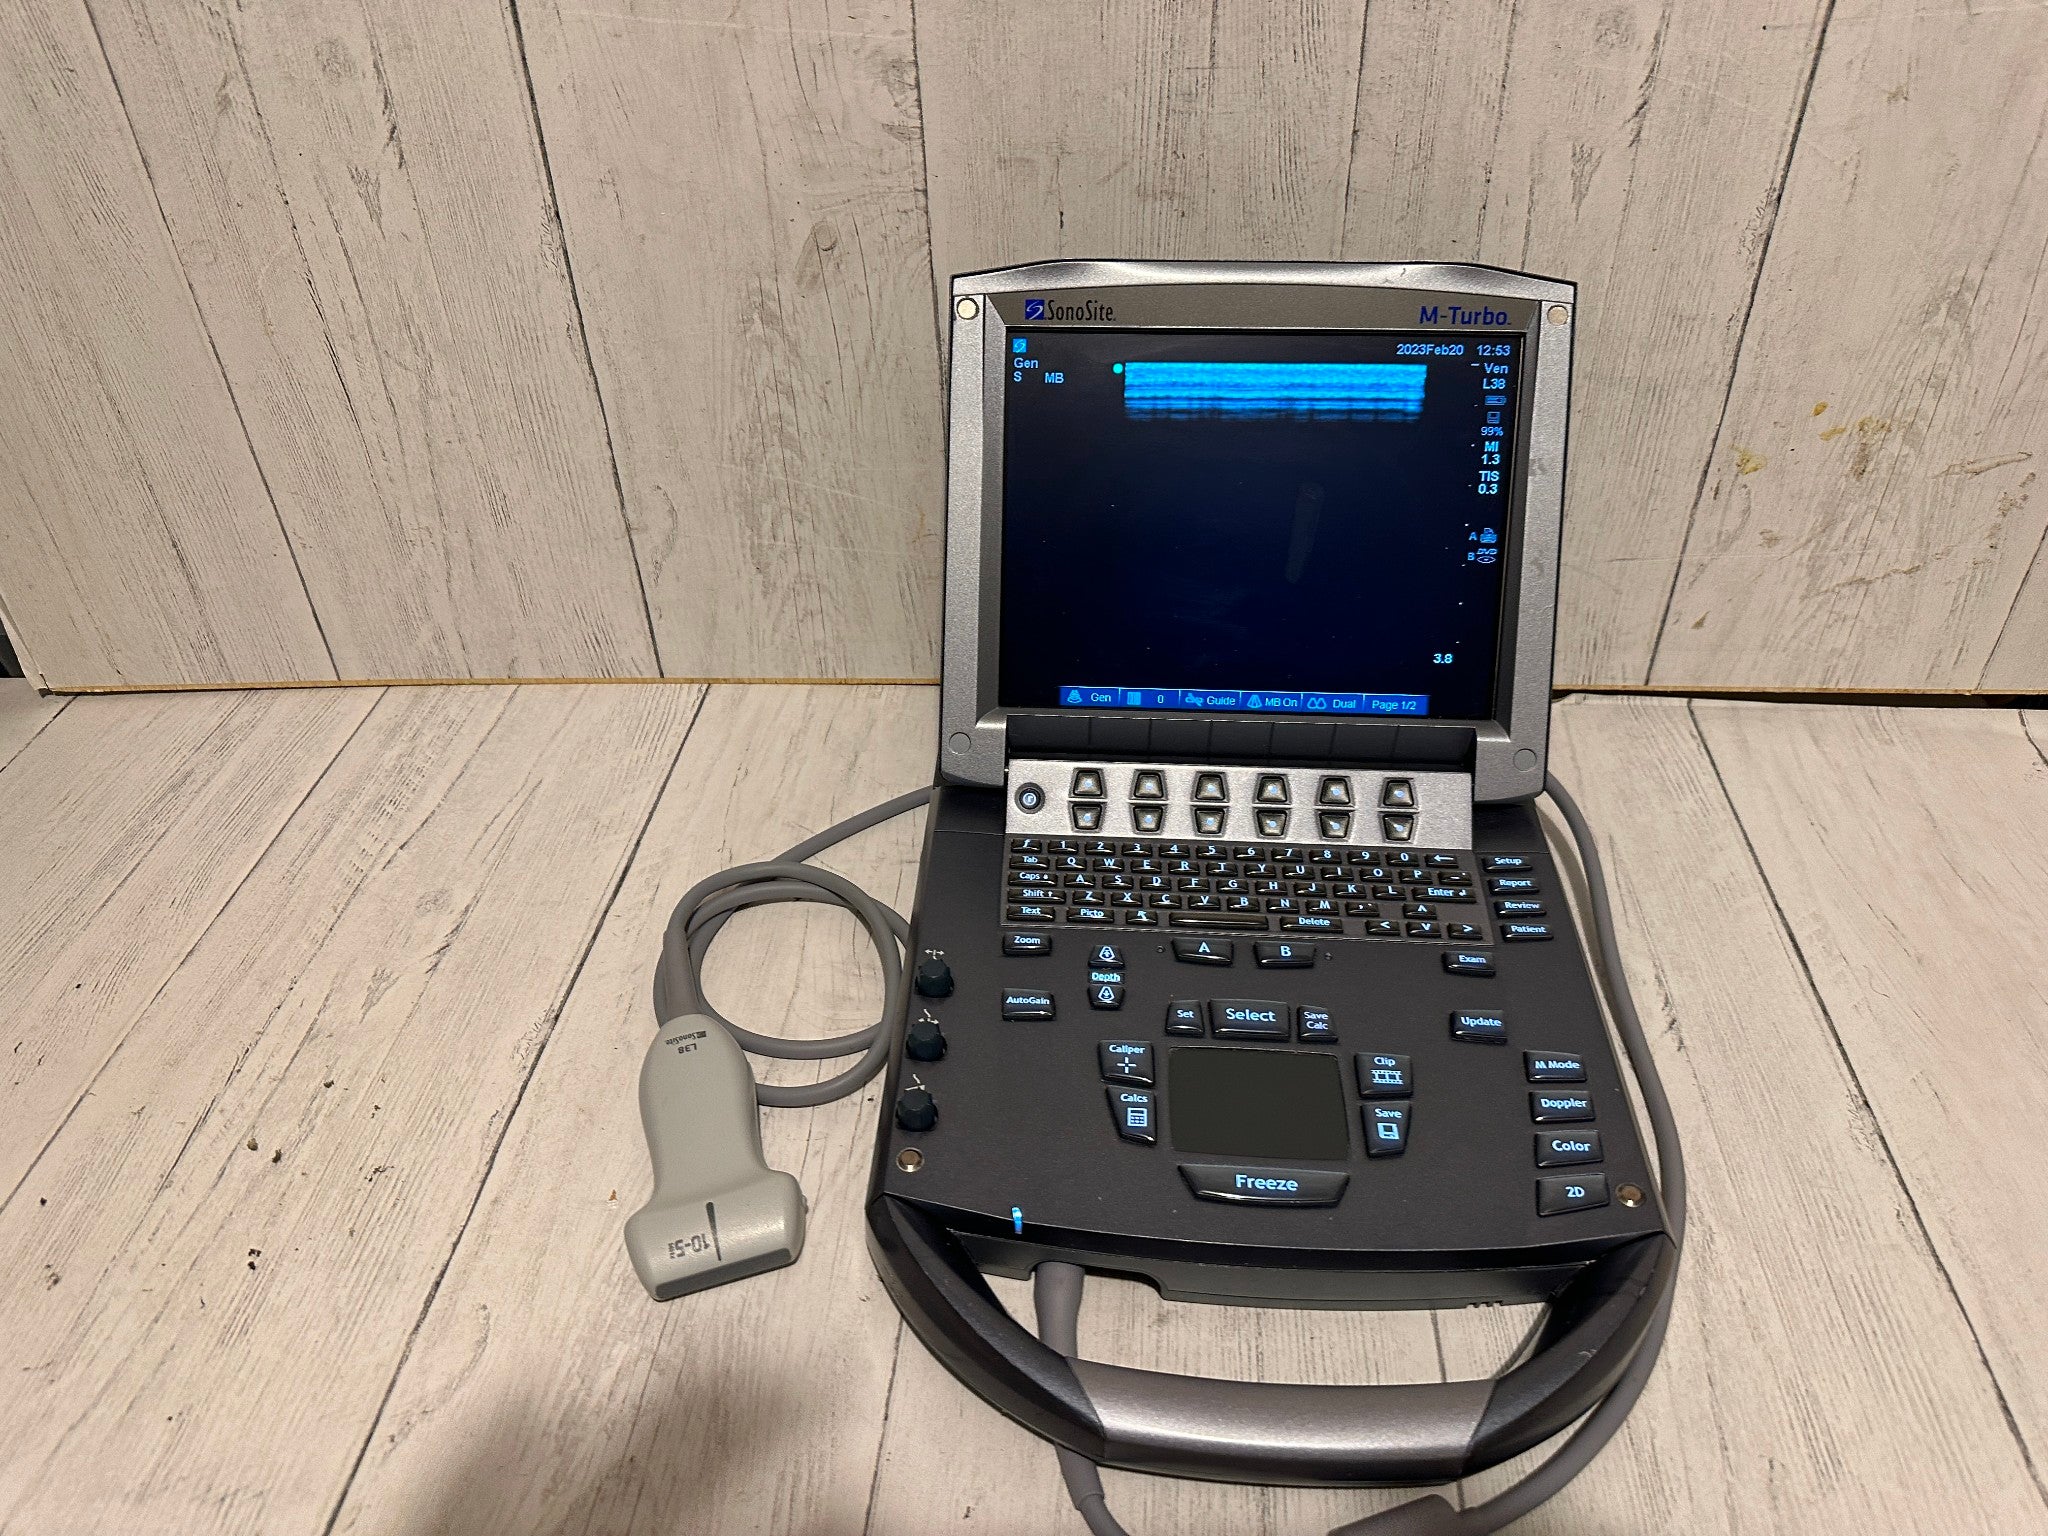 SonoSite M-Turbo Portable Ultrasound  2010 with Mini Dock Station DIAGNOSTIC ULTRASOUND MACHINES FOR SALE